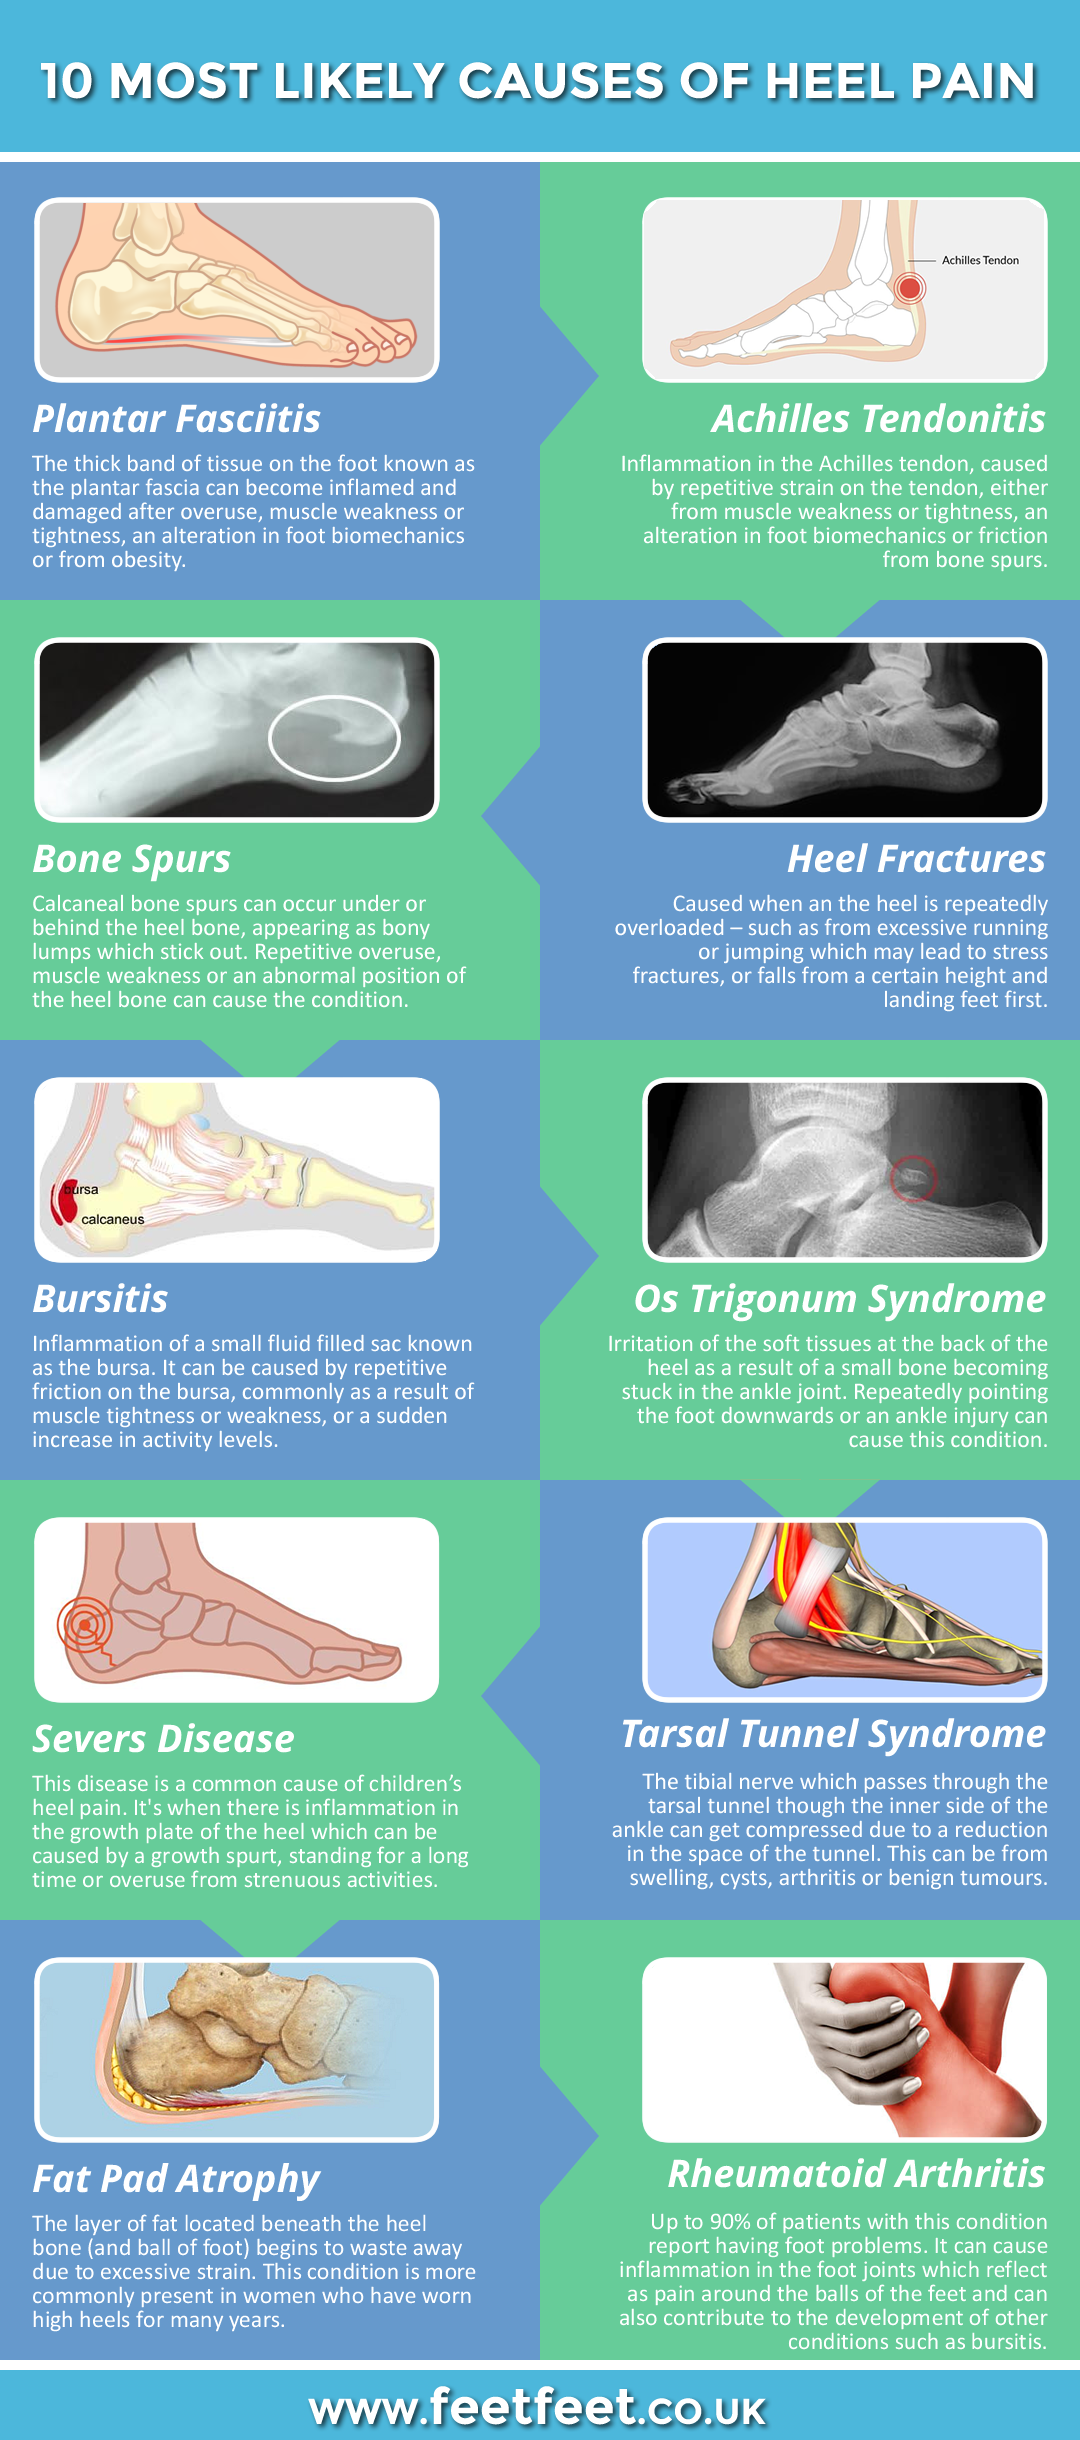 10 Tips To Help You If You Have A Flat Foot: Beltsville Foot and Ankle  Center: Podiatrists